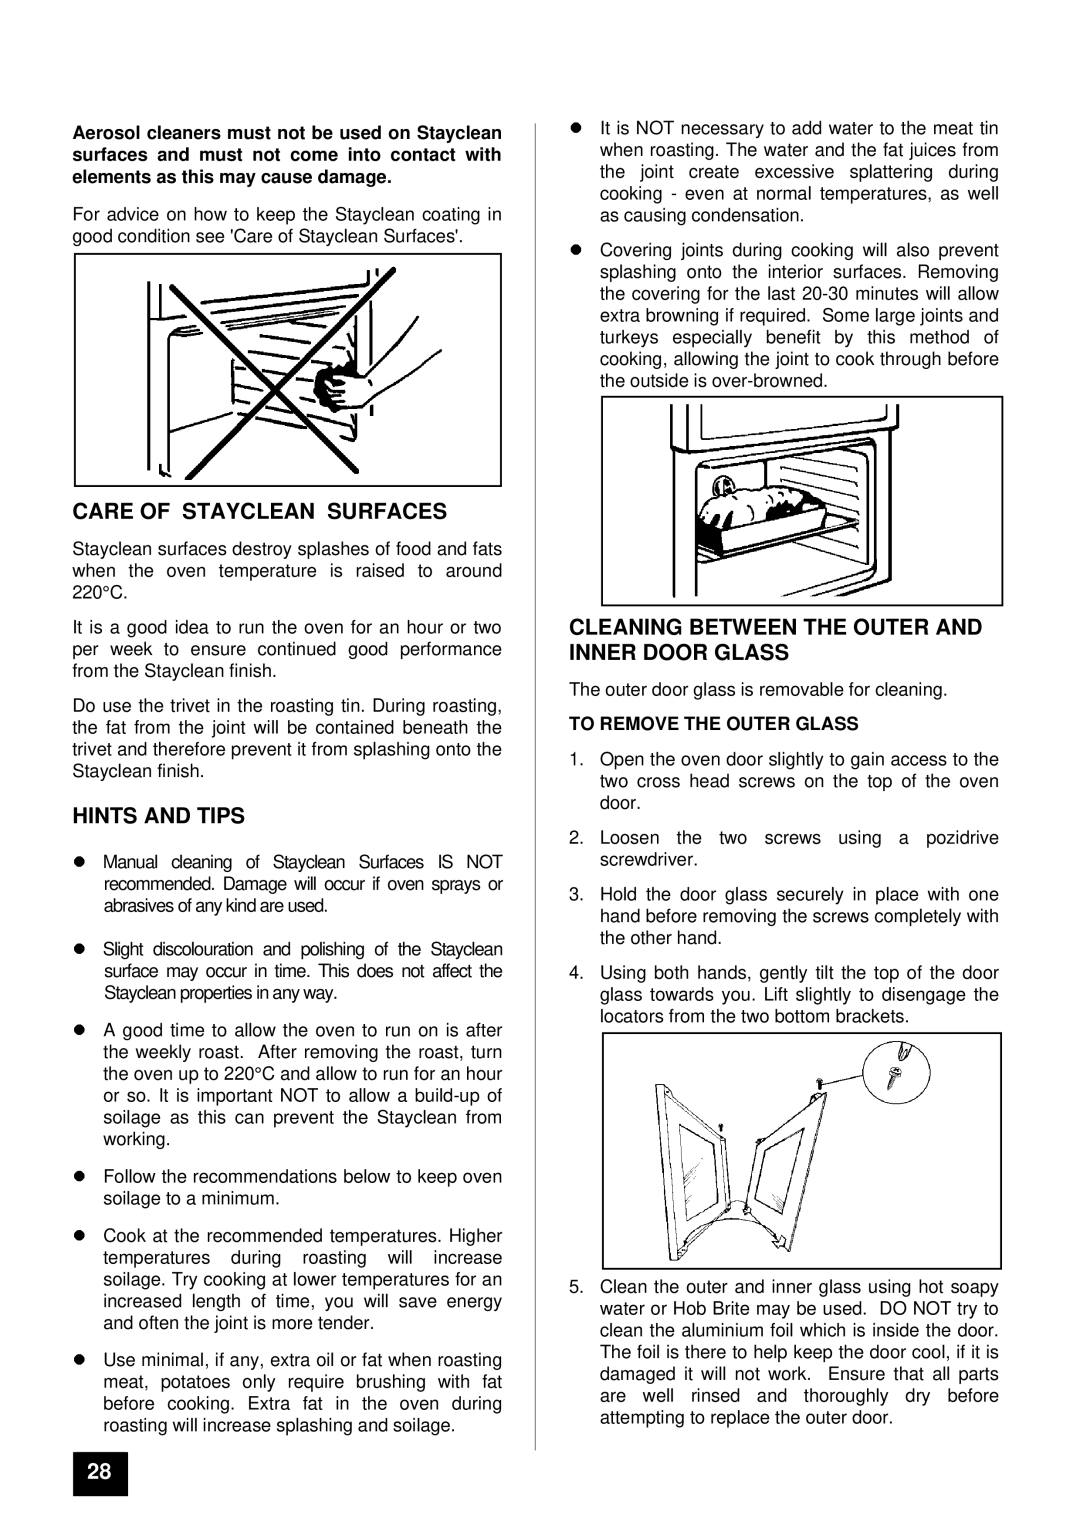 Tricity Bendix SB 461 installation instructions Care of Stayclean Surfaces, Cleaning Between the Outer and Inner Door Glass 